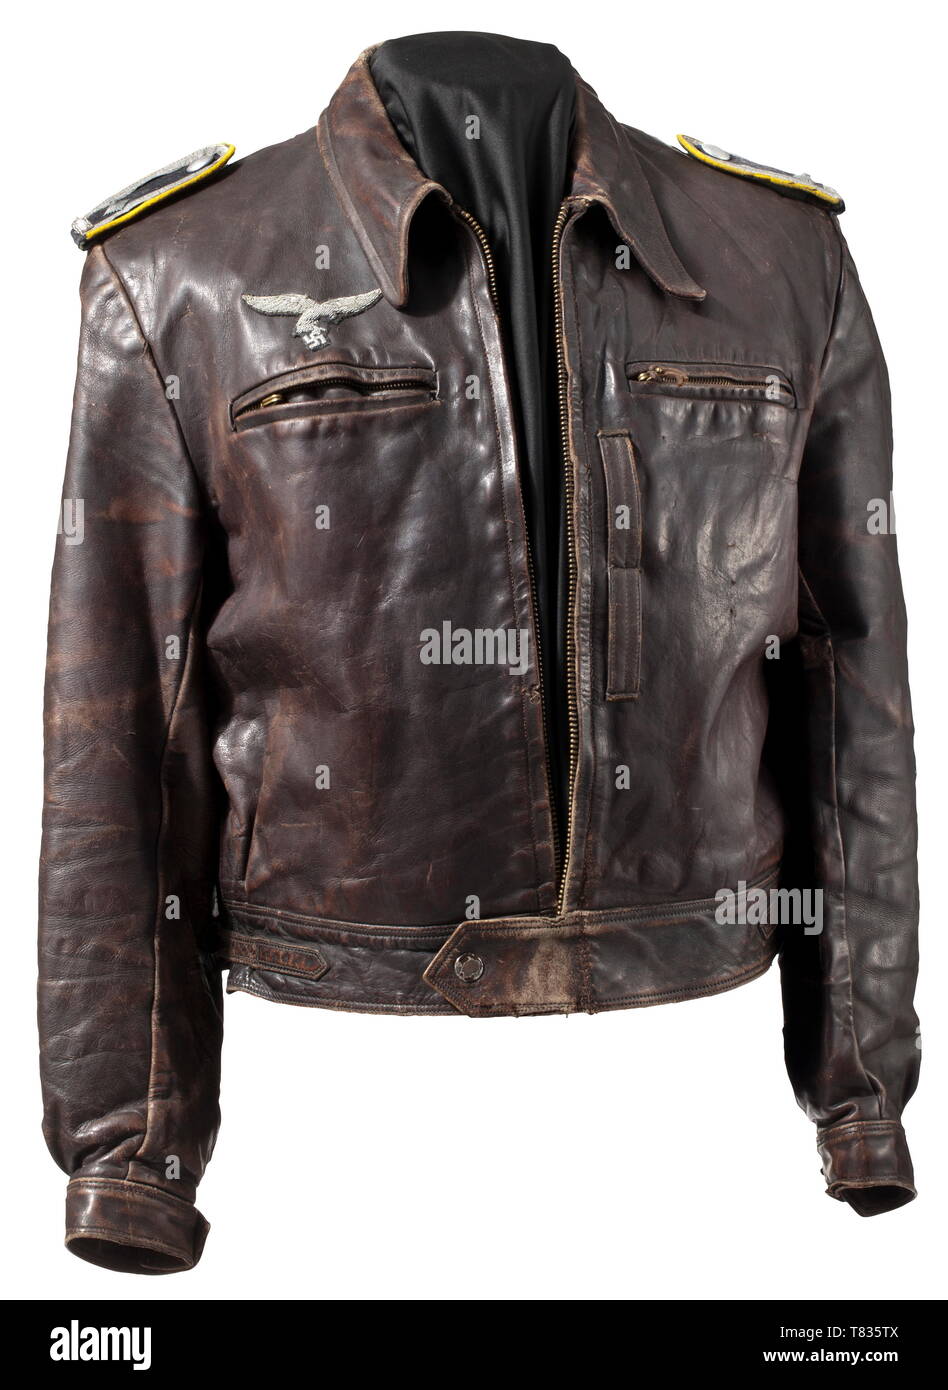 A leather jacket for a fighter pilot in the rank of an NCO Brown leather with looped shoulder boards, zipper ('Ritsch'), 'PRYM' press buttons, brown lining, hand-embroidered officer's eagle sewn on. A few flaws and repairs. Clearly worn, privately purchased leather jacket for a fighter pilot. historic, historical, Air Force, branch of service, branches of service, armed service, armed services, military, militaria, air forces, object, objects, stills, clipping, clippings, cut out, cut-out, cut-outs, 20th century, Editorial-Use-Only Stock Photo